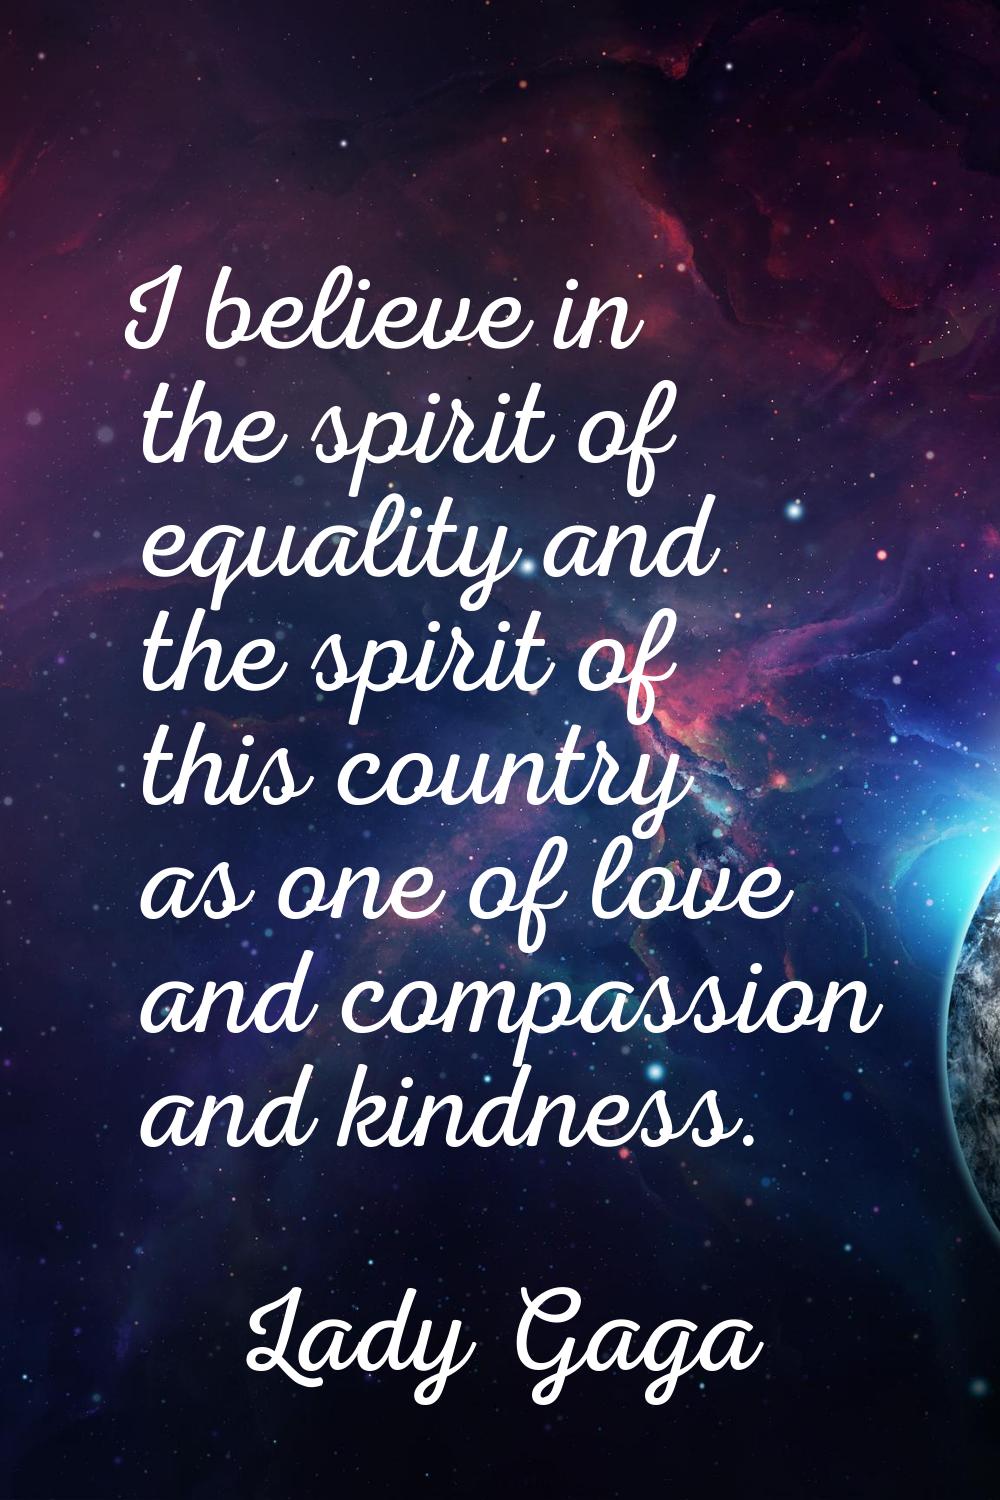 I believe in the spirit of equality and the spirit of this country as one of love and compassion an